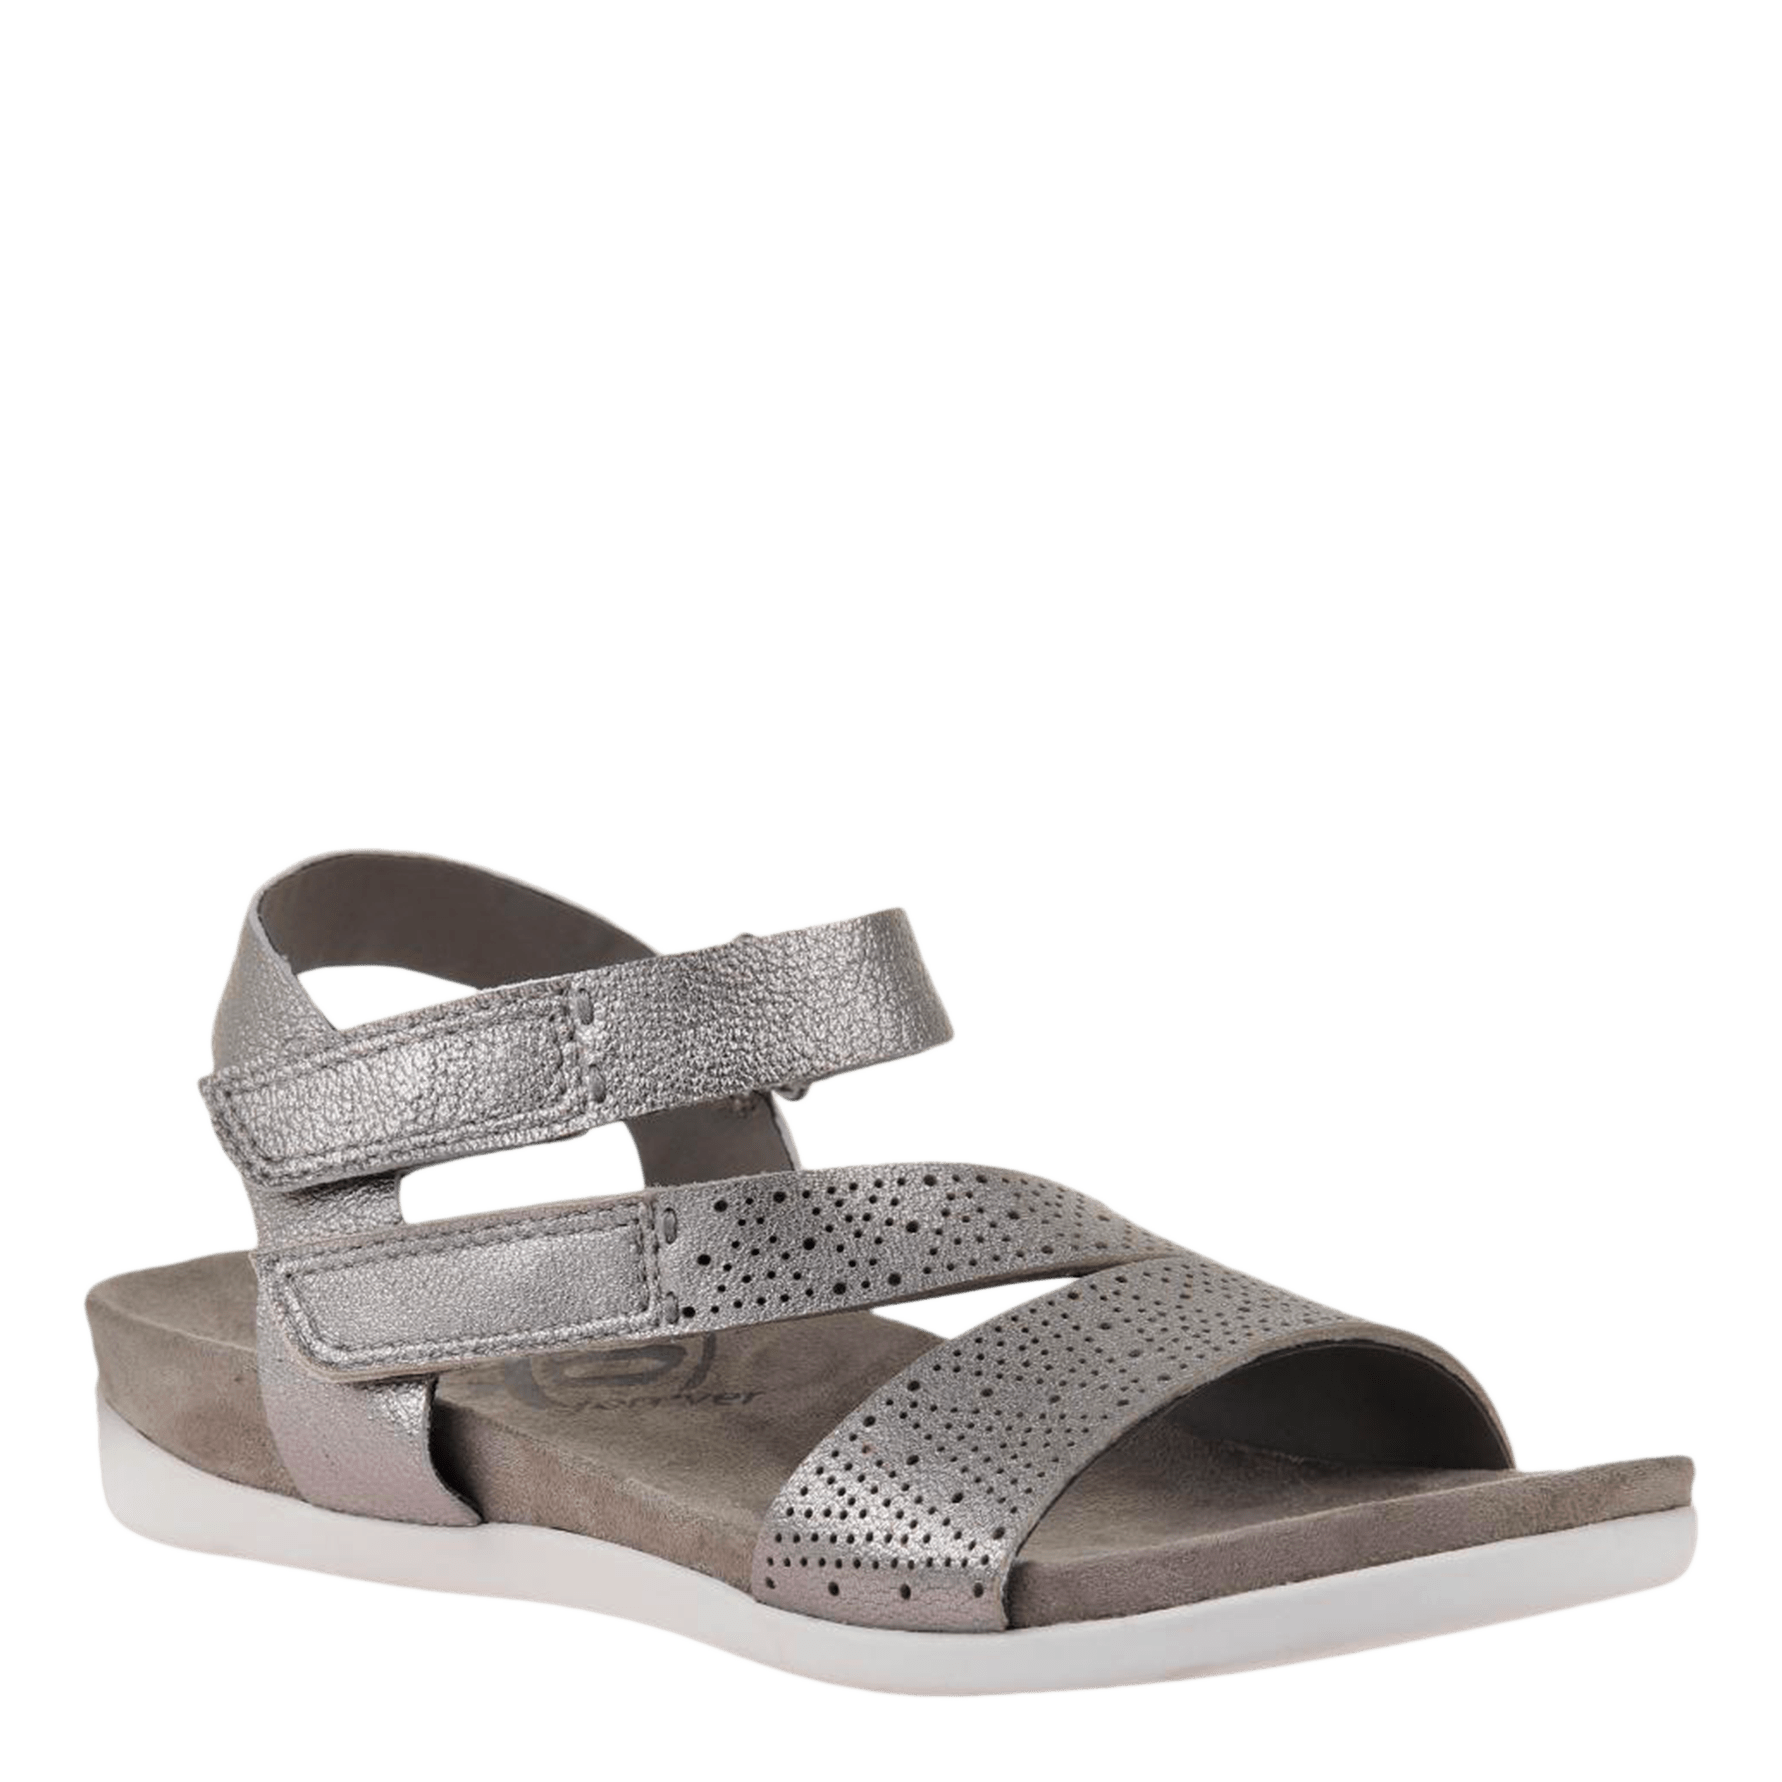 silver flat womens shoes